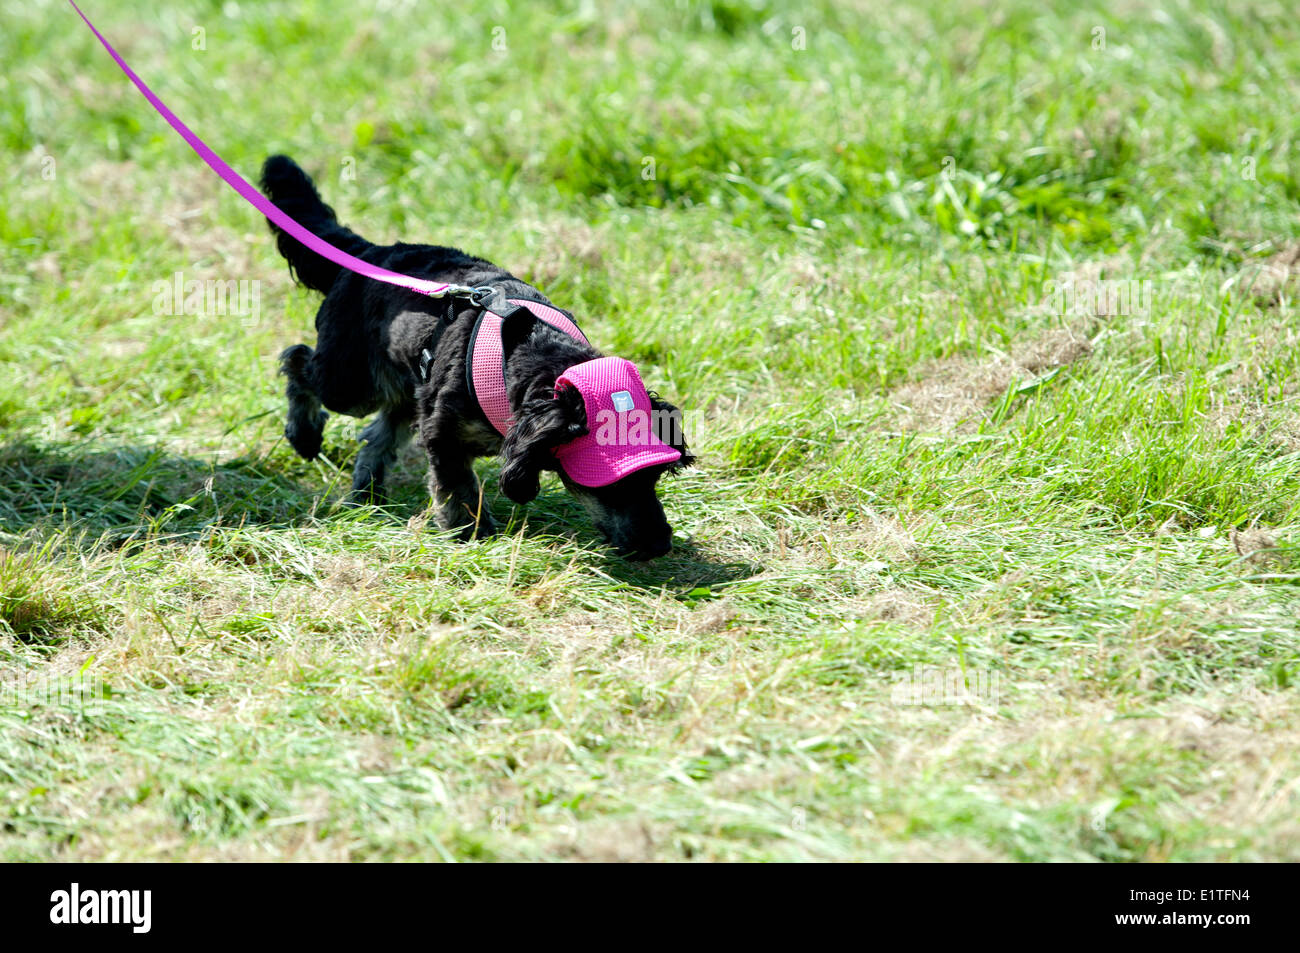 Race for Life, Cancer Research UK charity event, a dog wearing a hat taking part. Stock Photo